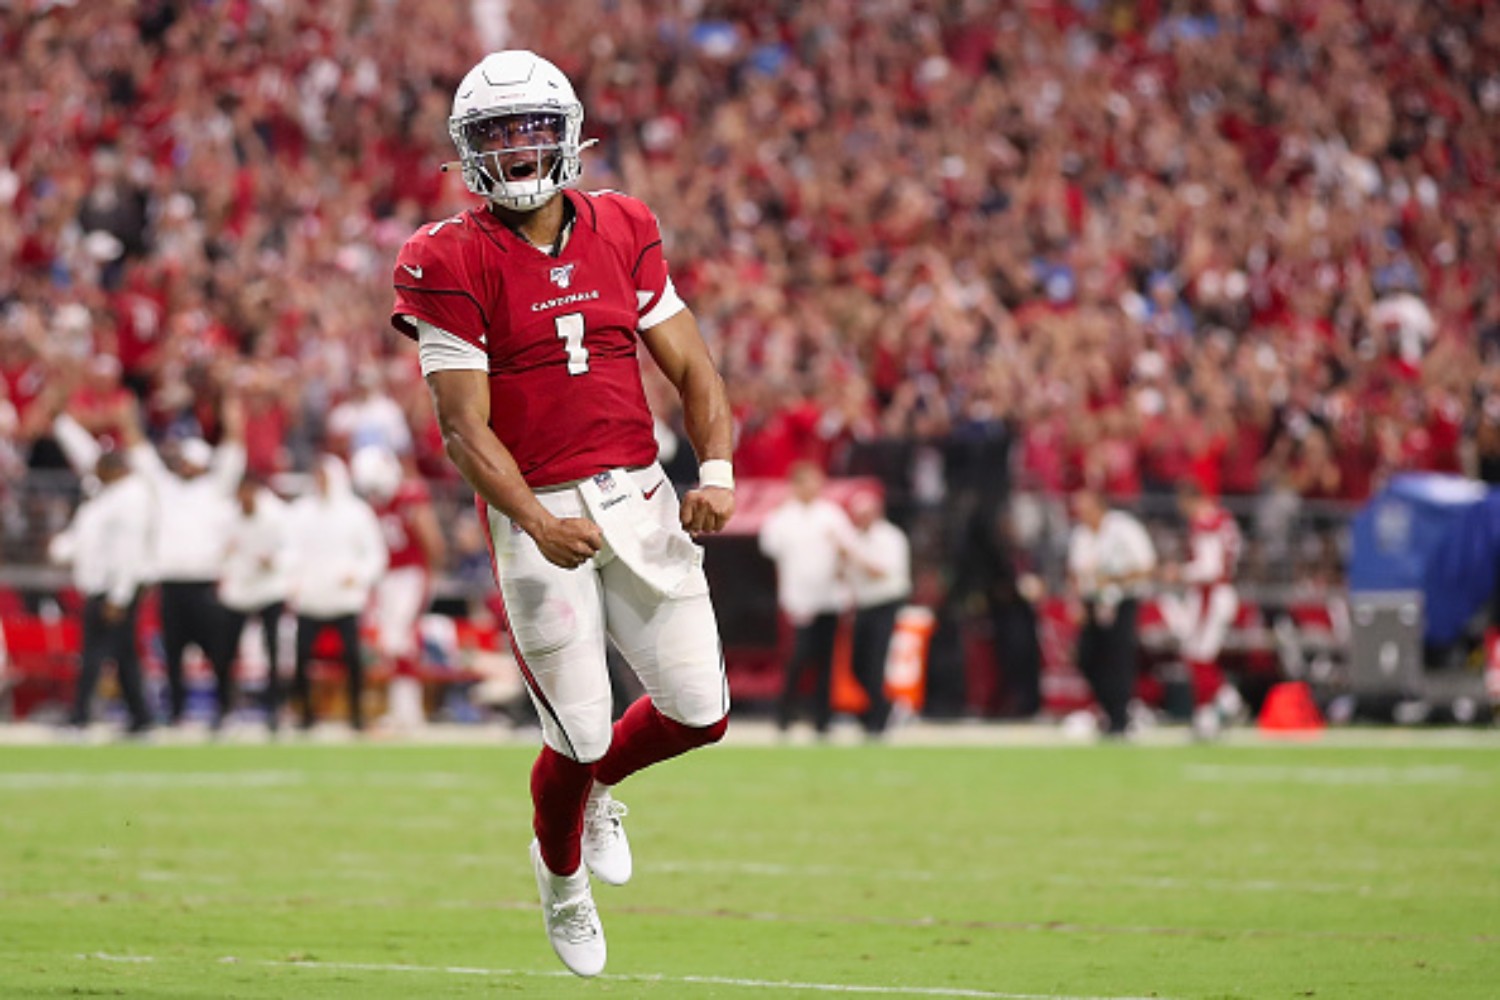 Kyler Murray’s Impressive Stat Shows Why He Has the Potential to Be a Star